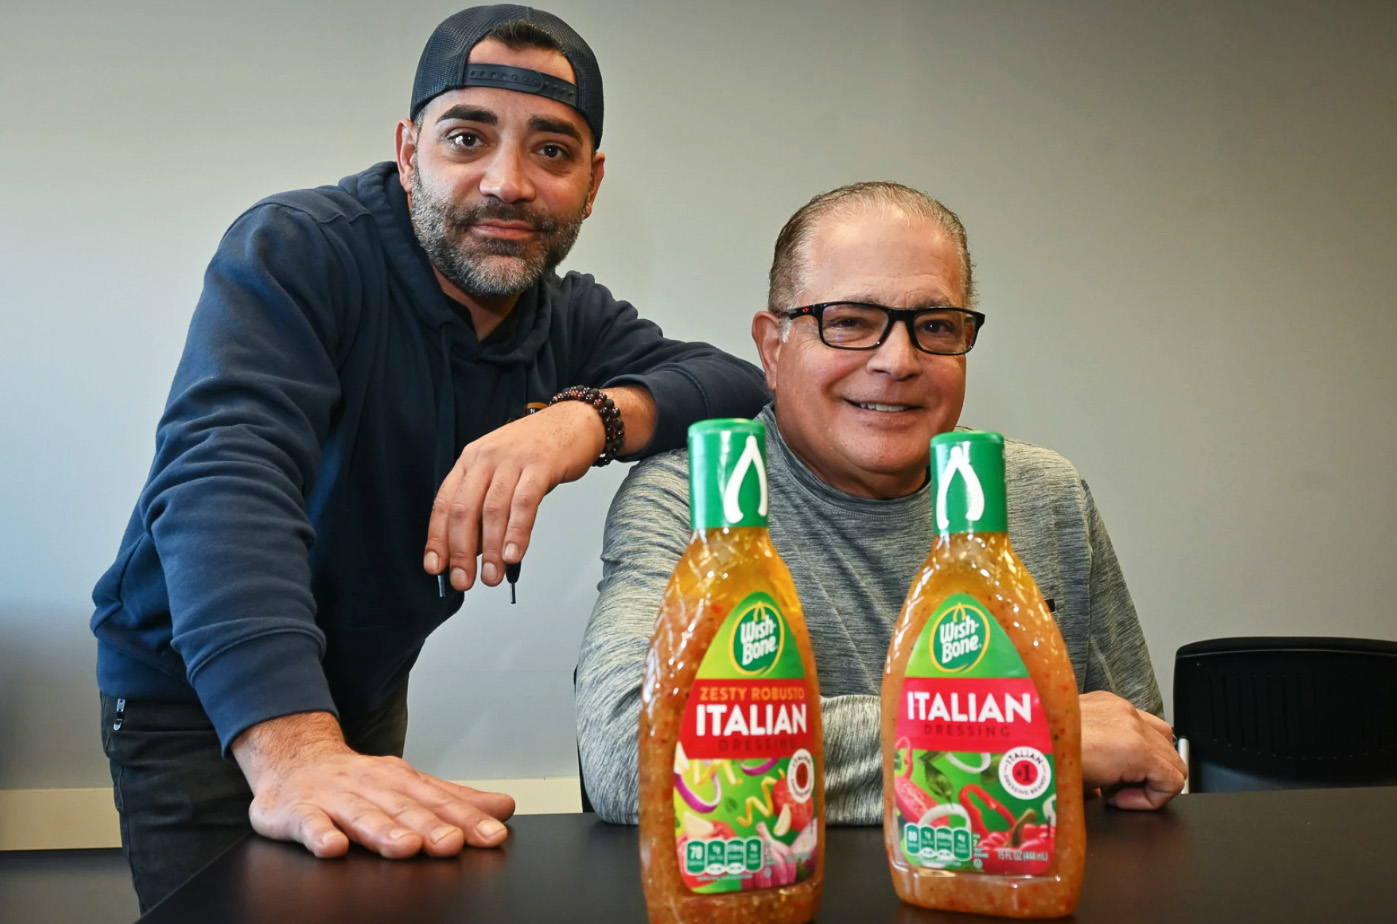 A KC family created Wish-Bone Italian Dressing for its fried chicken restaurant; it became an iconic American staple